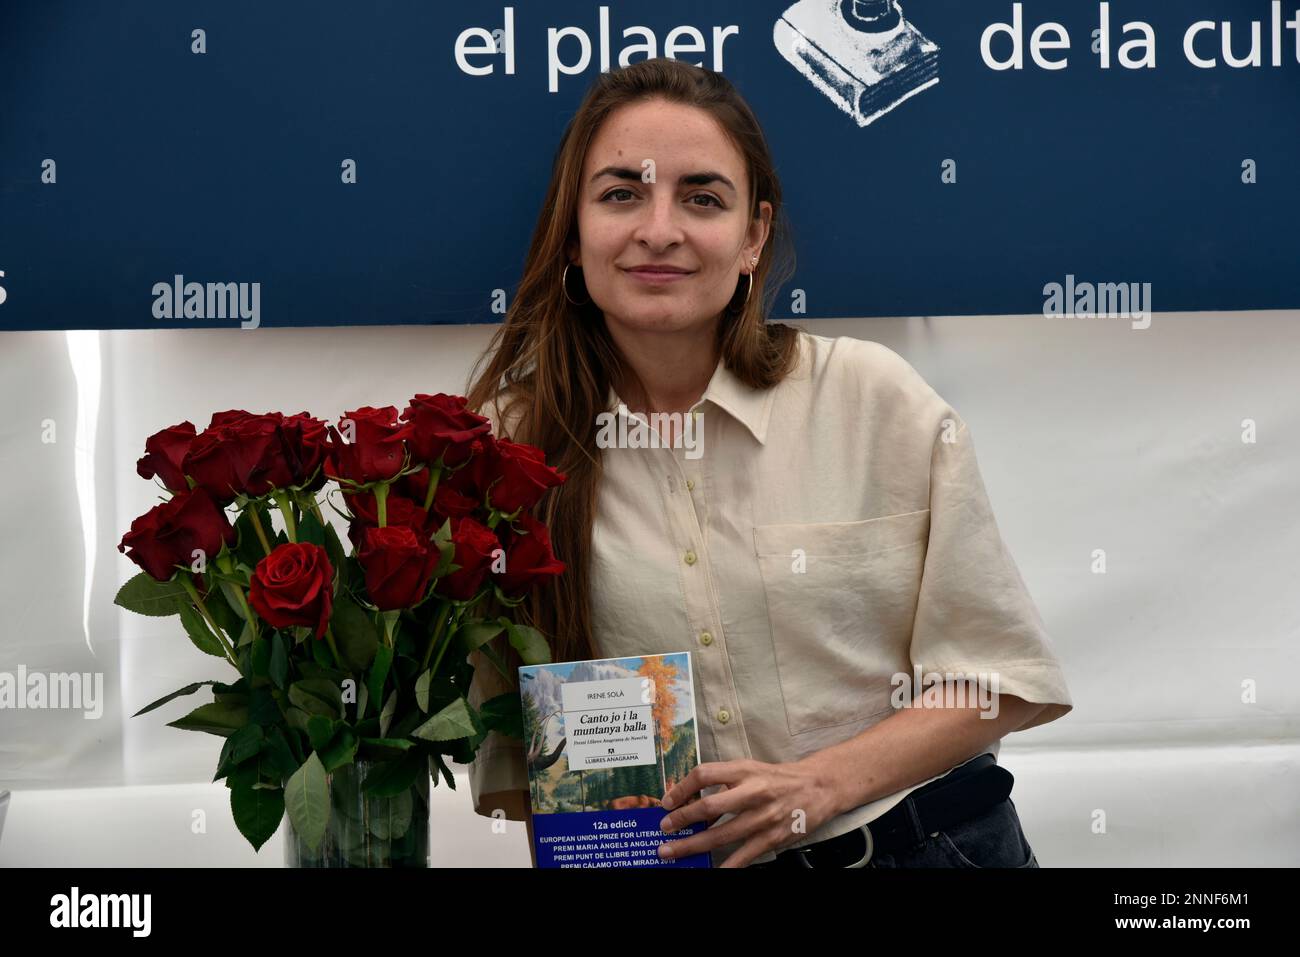 https://c8.alamy.com/comp/2NNF6M1/the-author-irene-sol-with-a-bouquet-of-red-roses-and-her-book-at-the-book-signing-on-sant-jordis-day-april-23rd-2021-in-barcelona-catalonia-spain-although-there-will-be-no-flowers-and-book-stalls-on-the-ramblas-due-to-the-restrictions-of-the-pandemic-12-large-spaces-have-been-set-up-throughout-the-different-districts-of-the-city-where-17-authors-will-sign-their-books-in-order-to-reduce-travel-and-crowds-in-the-most-central-points-of-the-city-in-addition-fairs-and-safe-spaces-have-been-set-up-in-different-locations-in-the-region-23-april-2021cervantesbook-day23-aprilculturealc-2NNF6M1.jpg